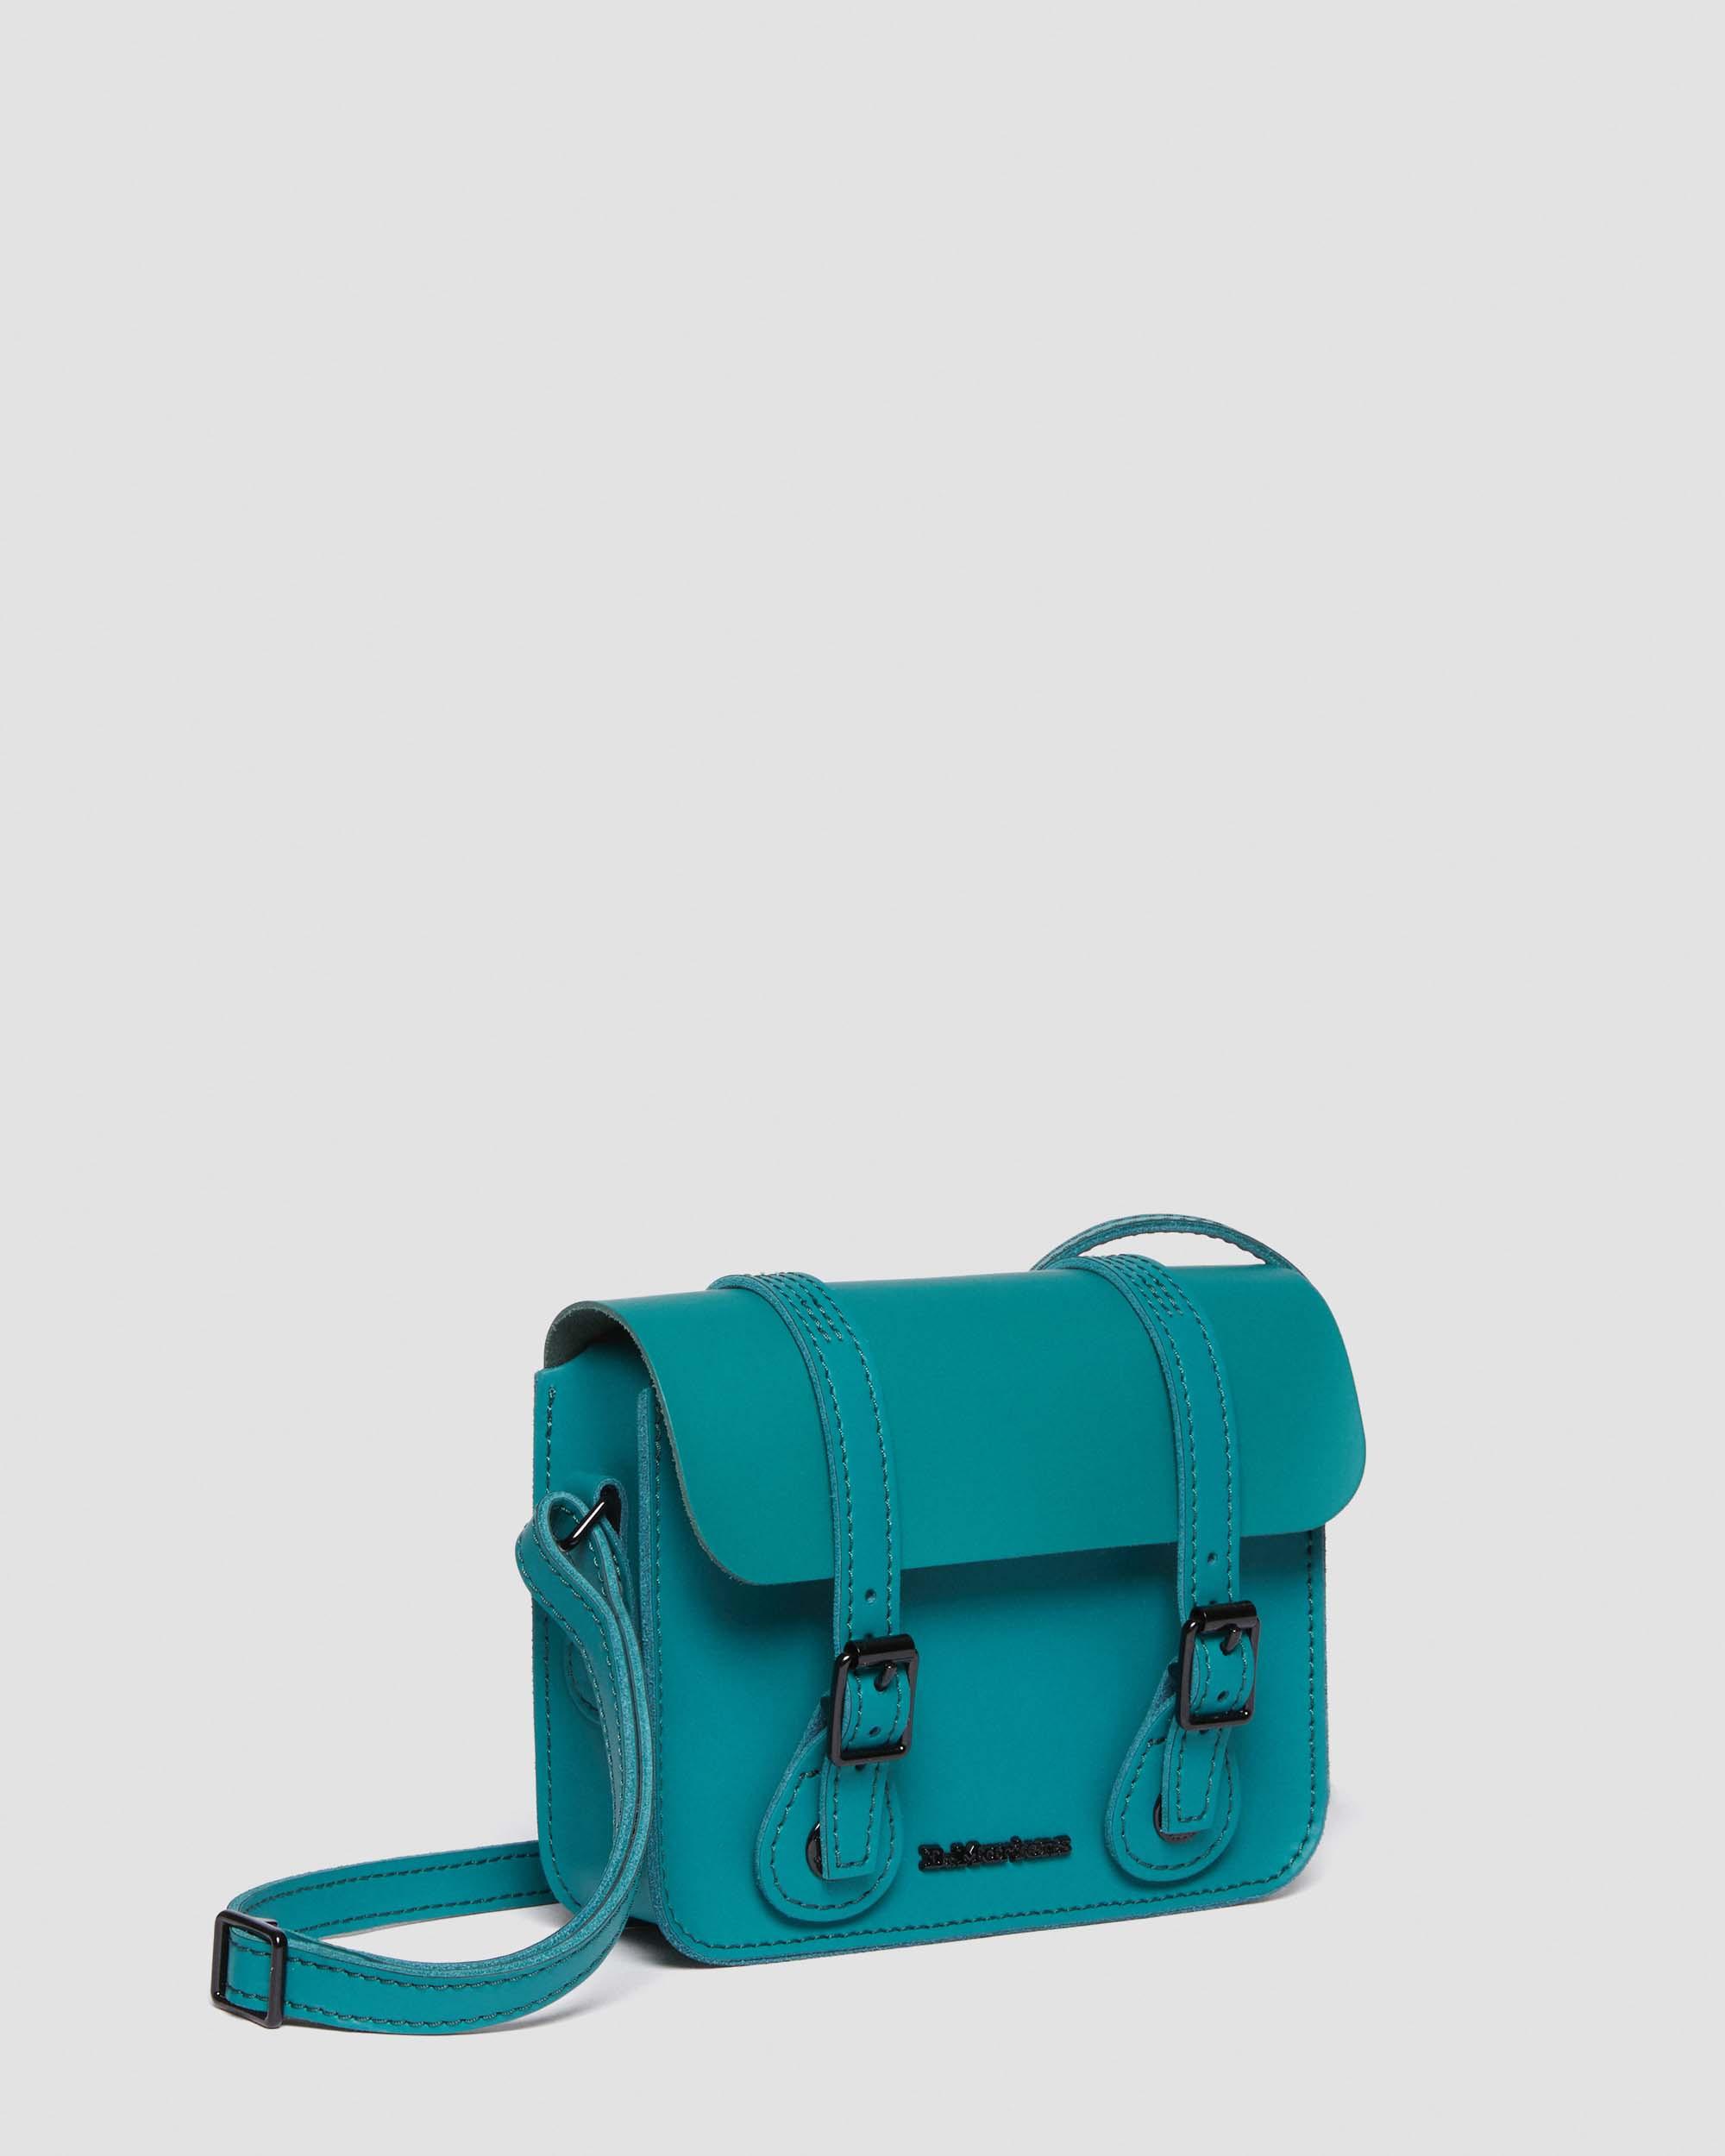 7 inch Patent Leather Crossbody Bag in Turquoise